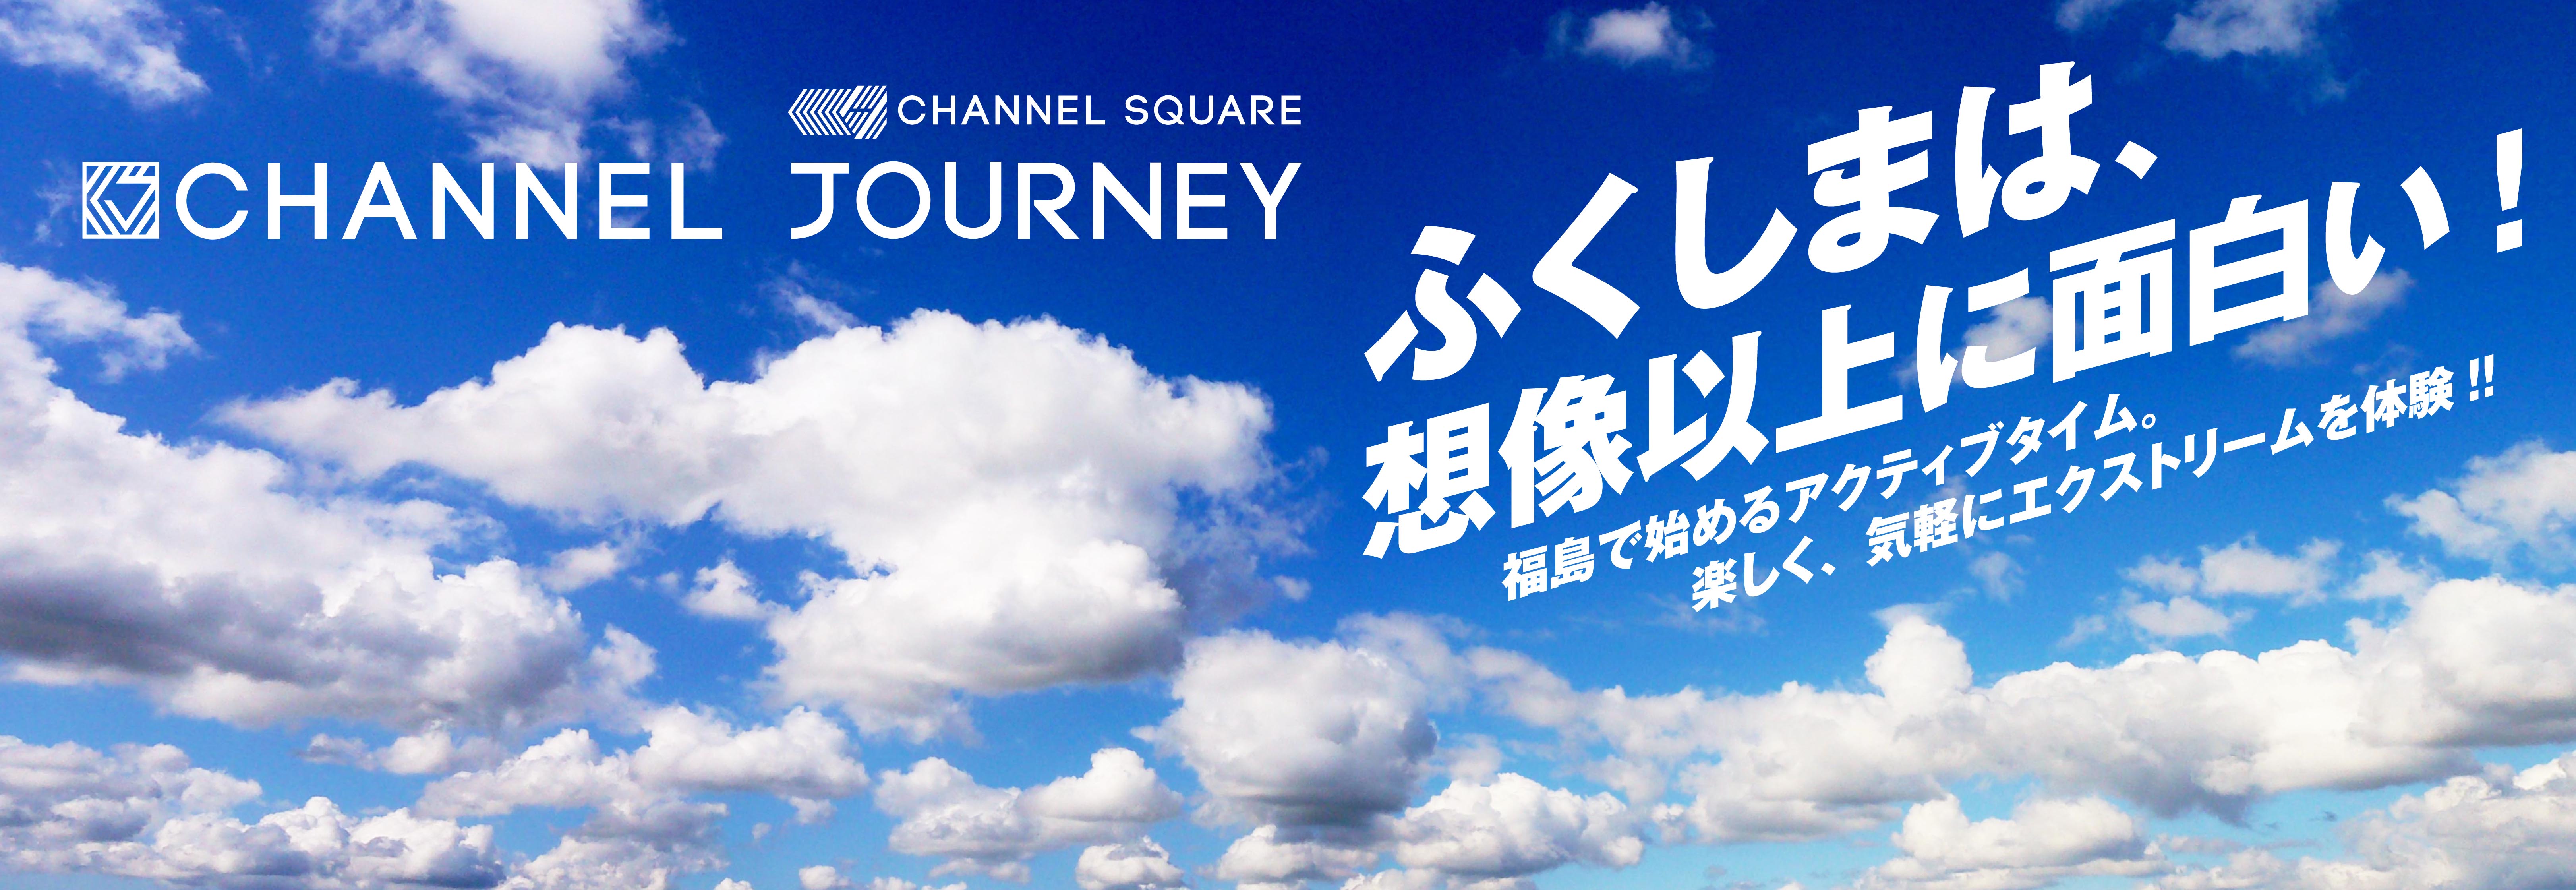 CHANNEL JOURNEY